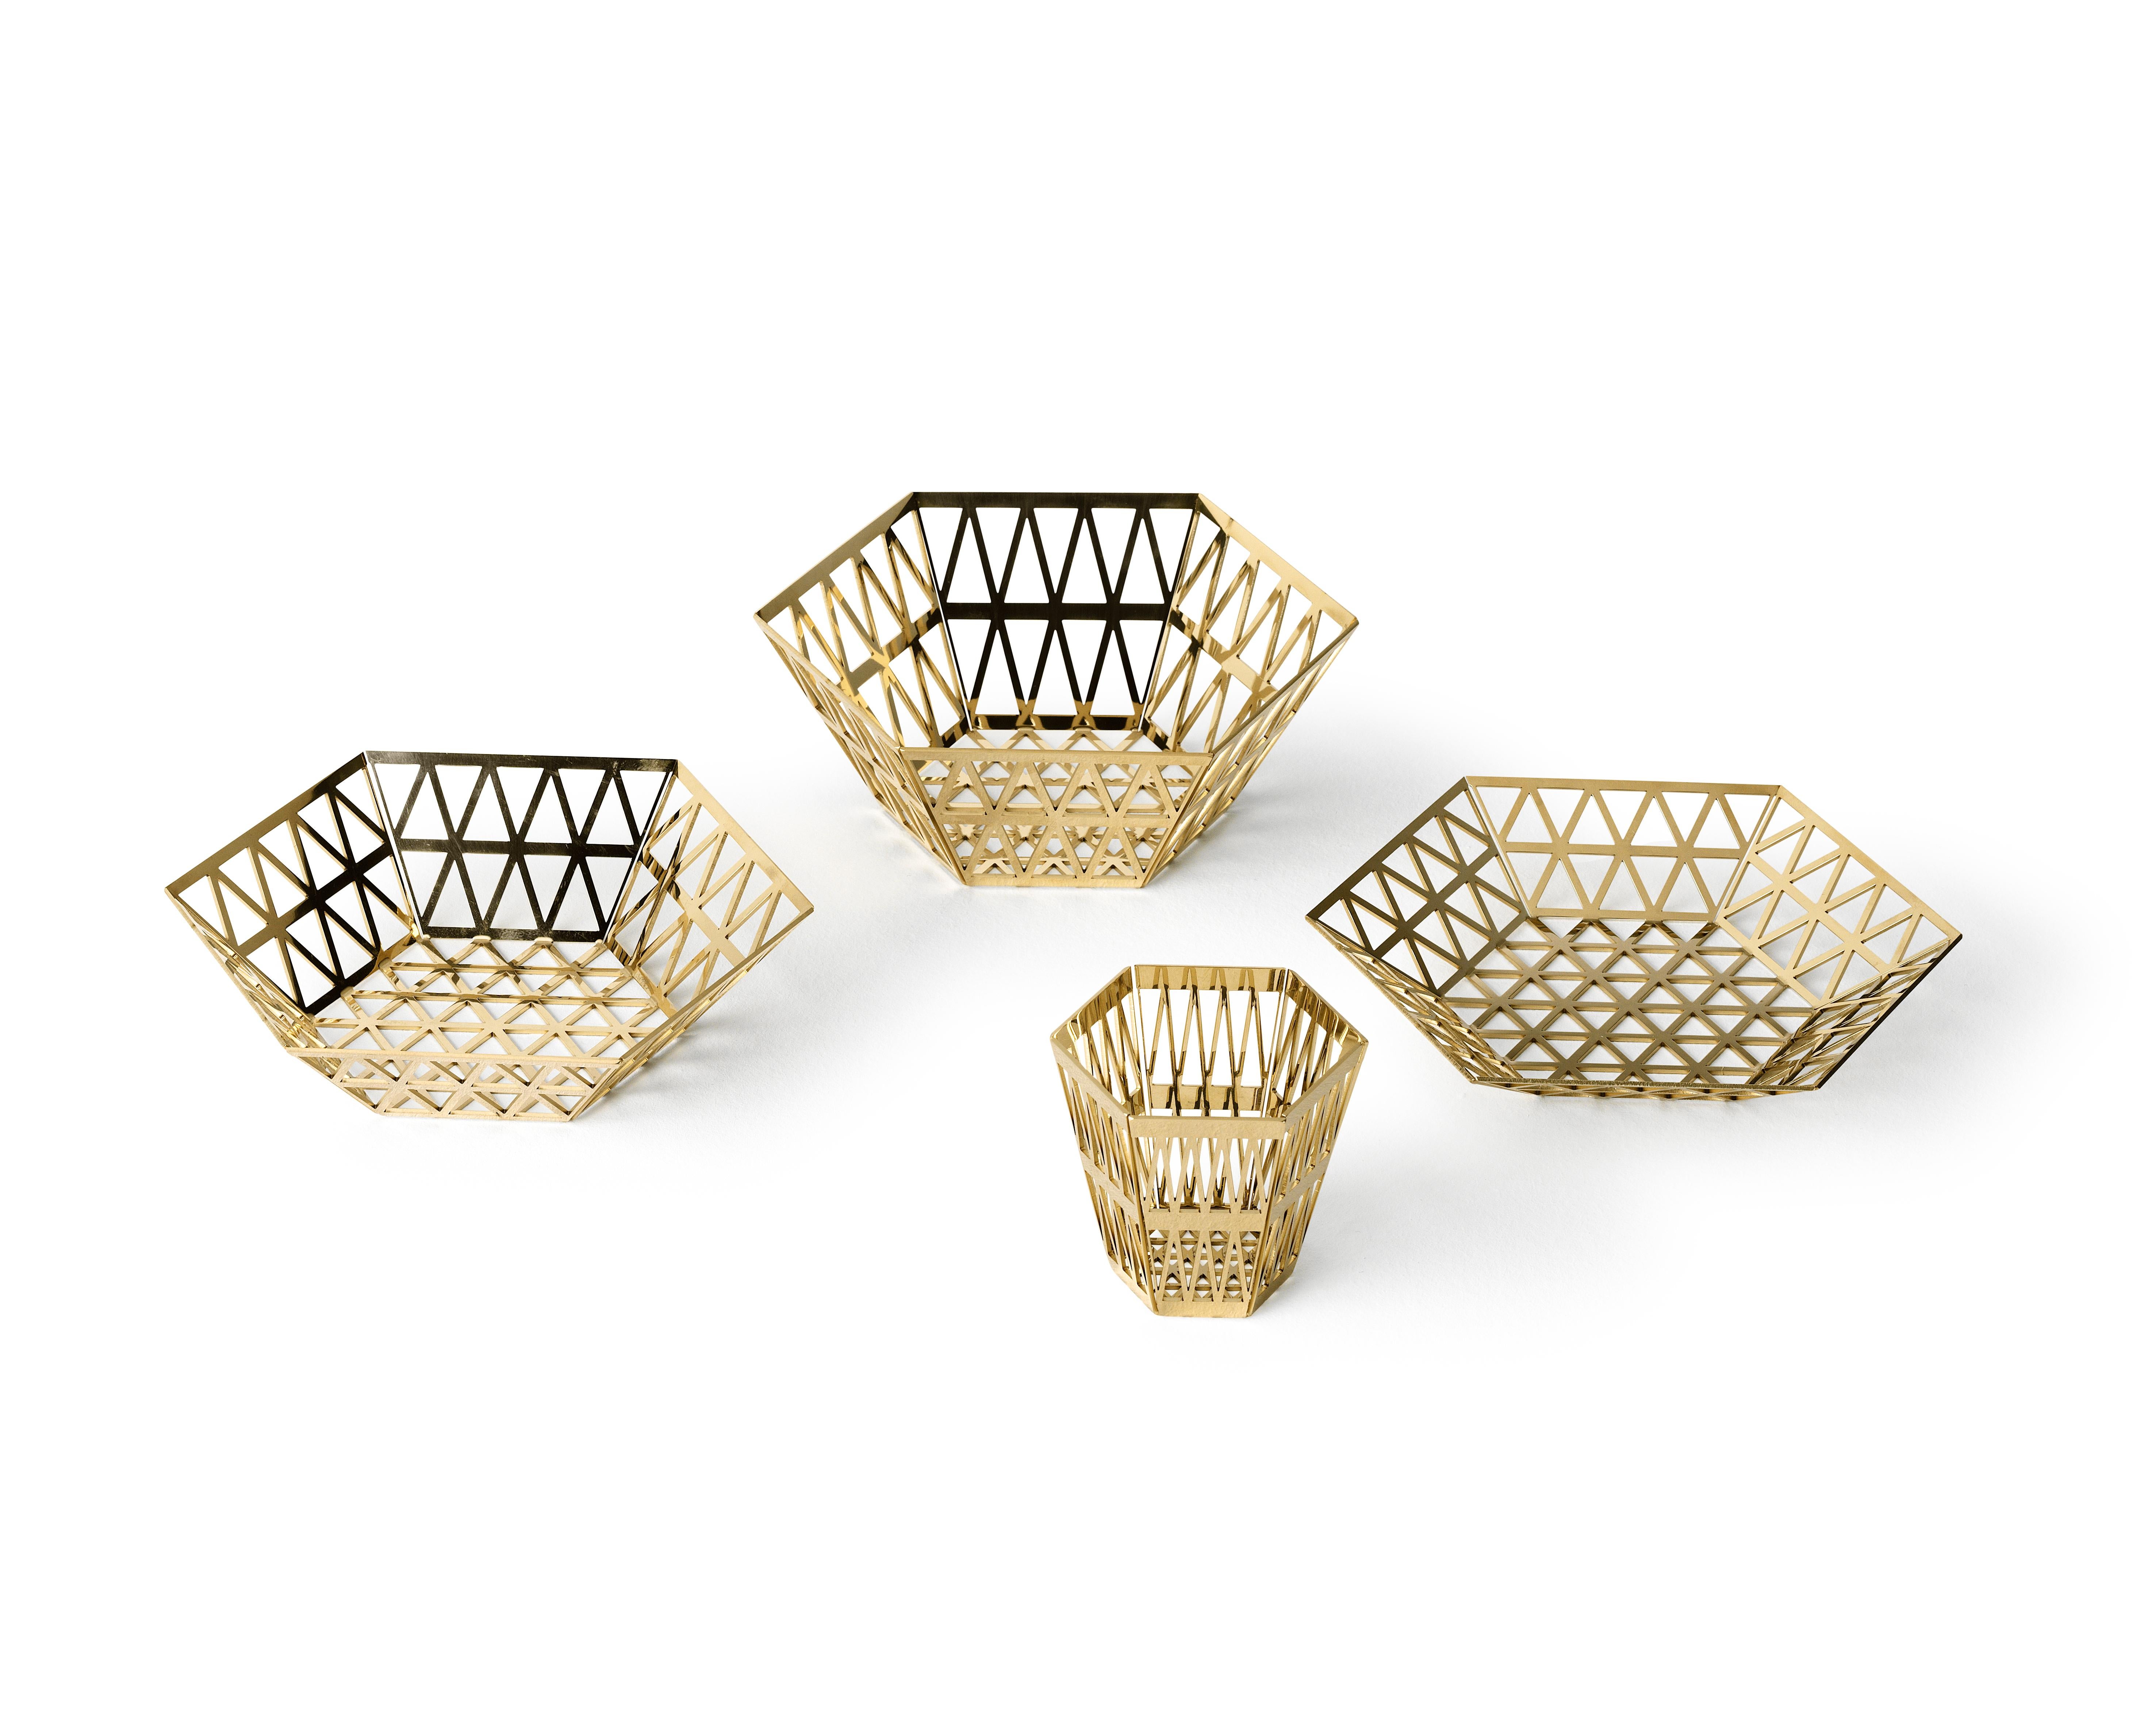 Tray in openwork steel.
When you look at the top view of the Tip-Top series, all the triangles have the same size. In 3D these triangles have been stretched, which creates a very surprising hexagonal structure, applied to different